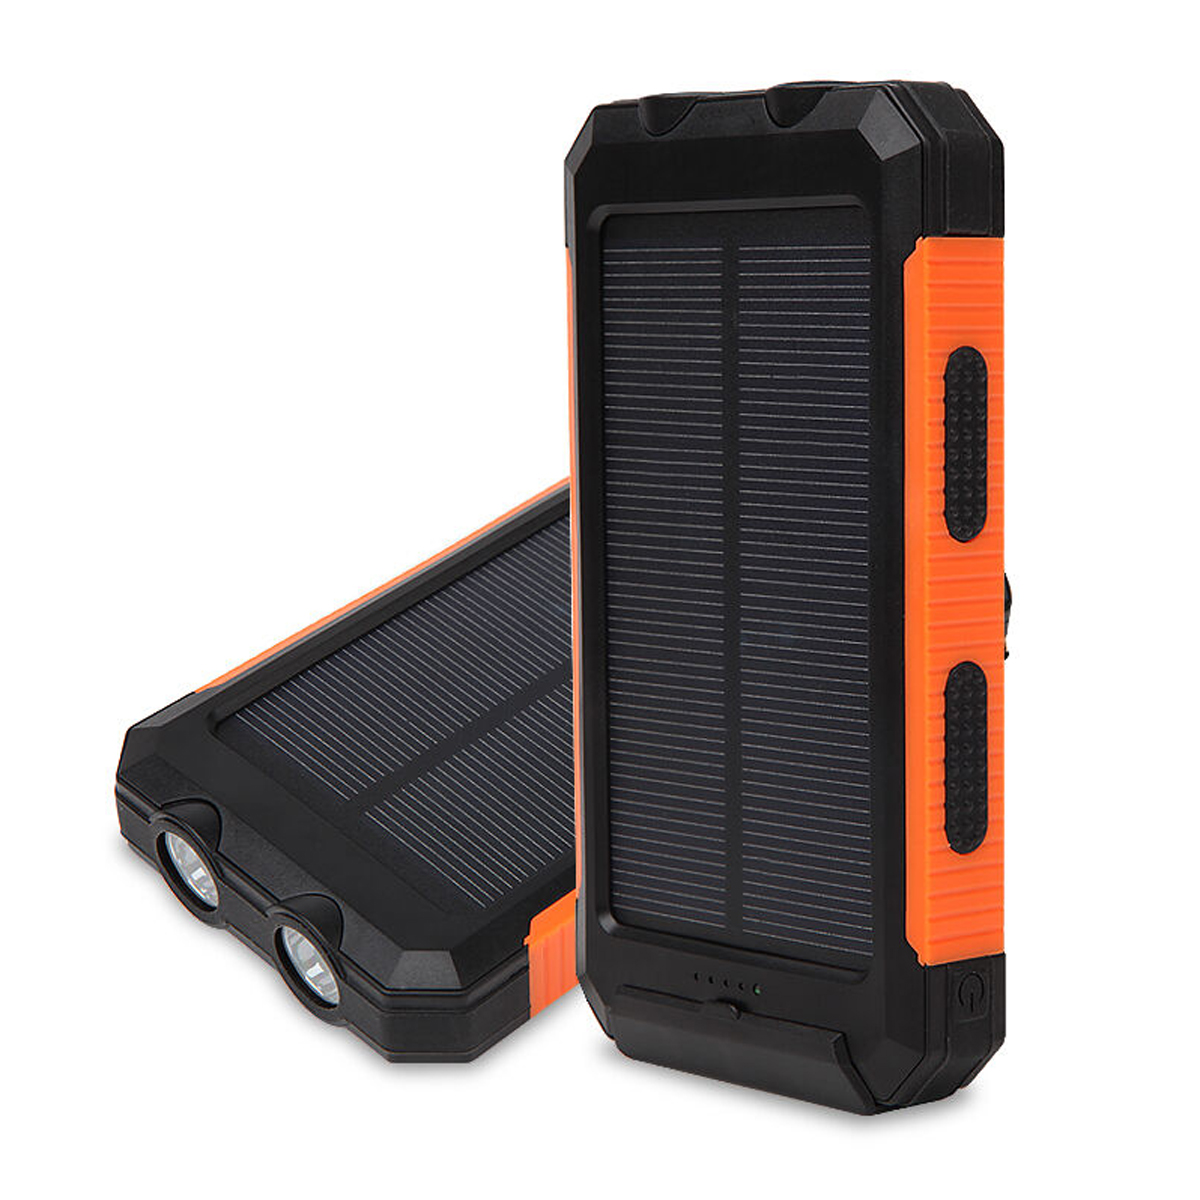 8000MAH-Waterproof-Solar-Power-Bank-Solar-Charger-Built-In-Compass-Dual-USB-Portable-2-LEDs-Light-1716505-6